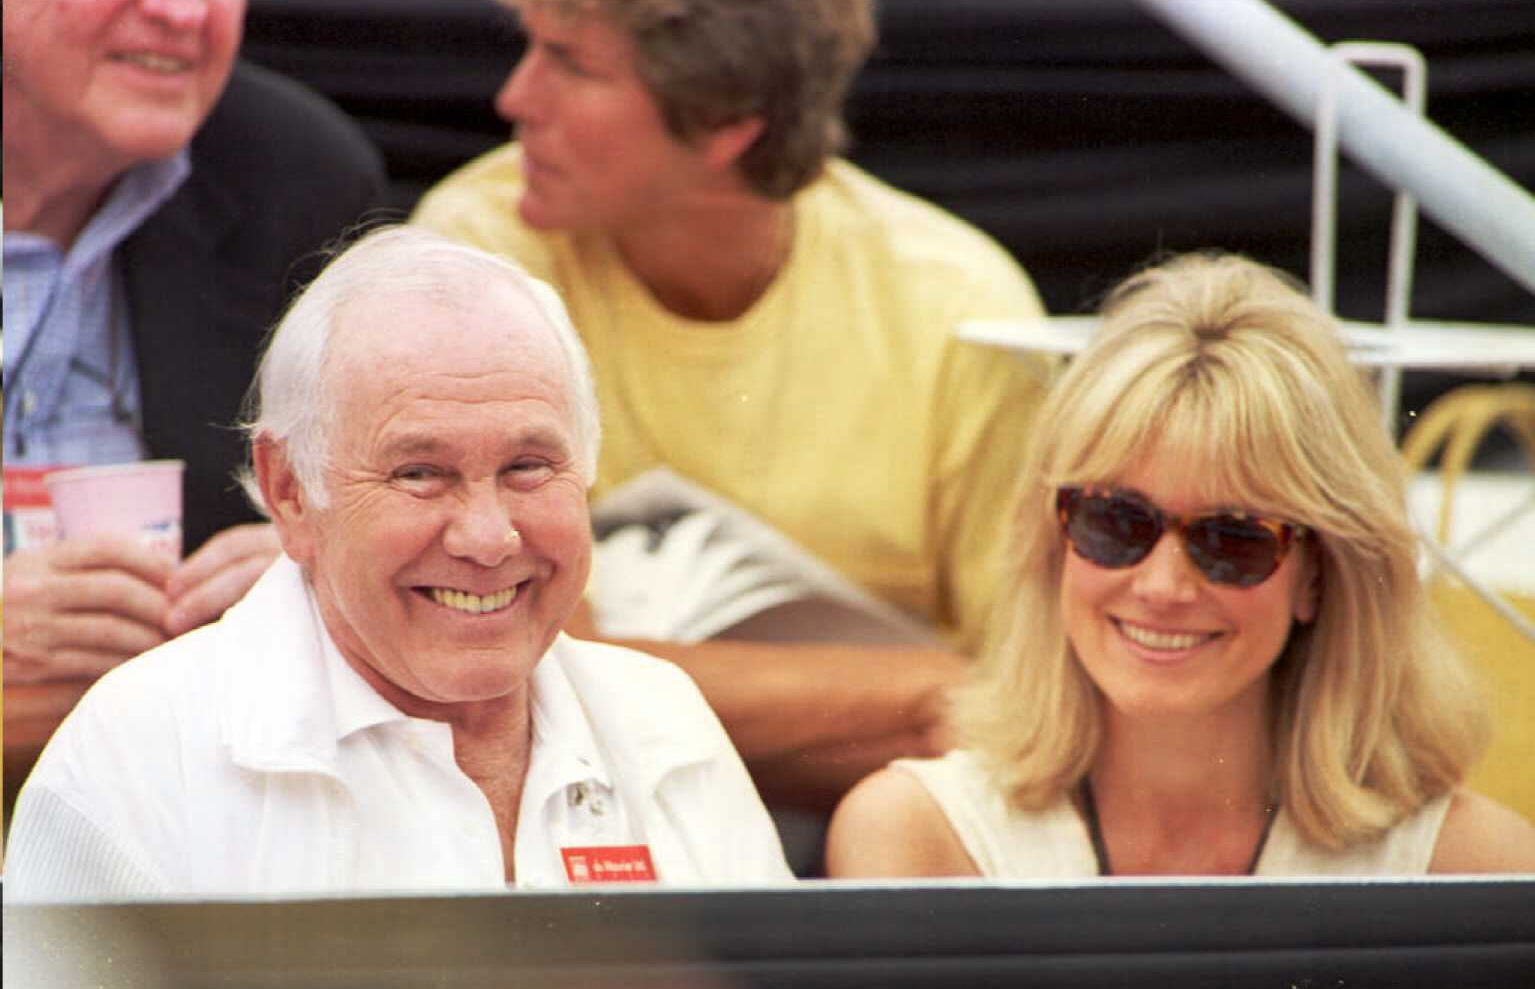 Retired talk show host Johnny Carson and his wife Alexis Maas watch the tennis match between Mary Pierce of France and Martina Hingis of Switzerland during the Canadian Open event. | Source: Getty Images